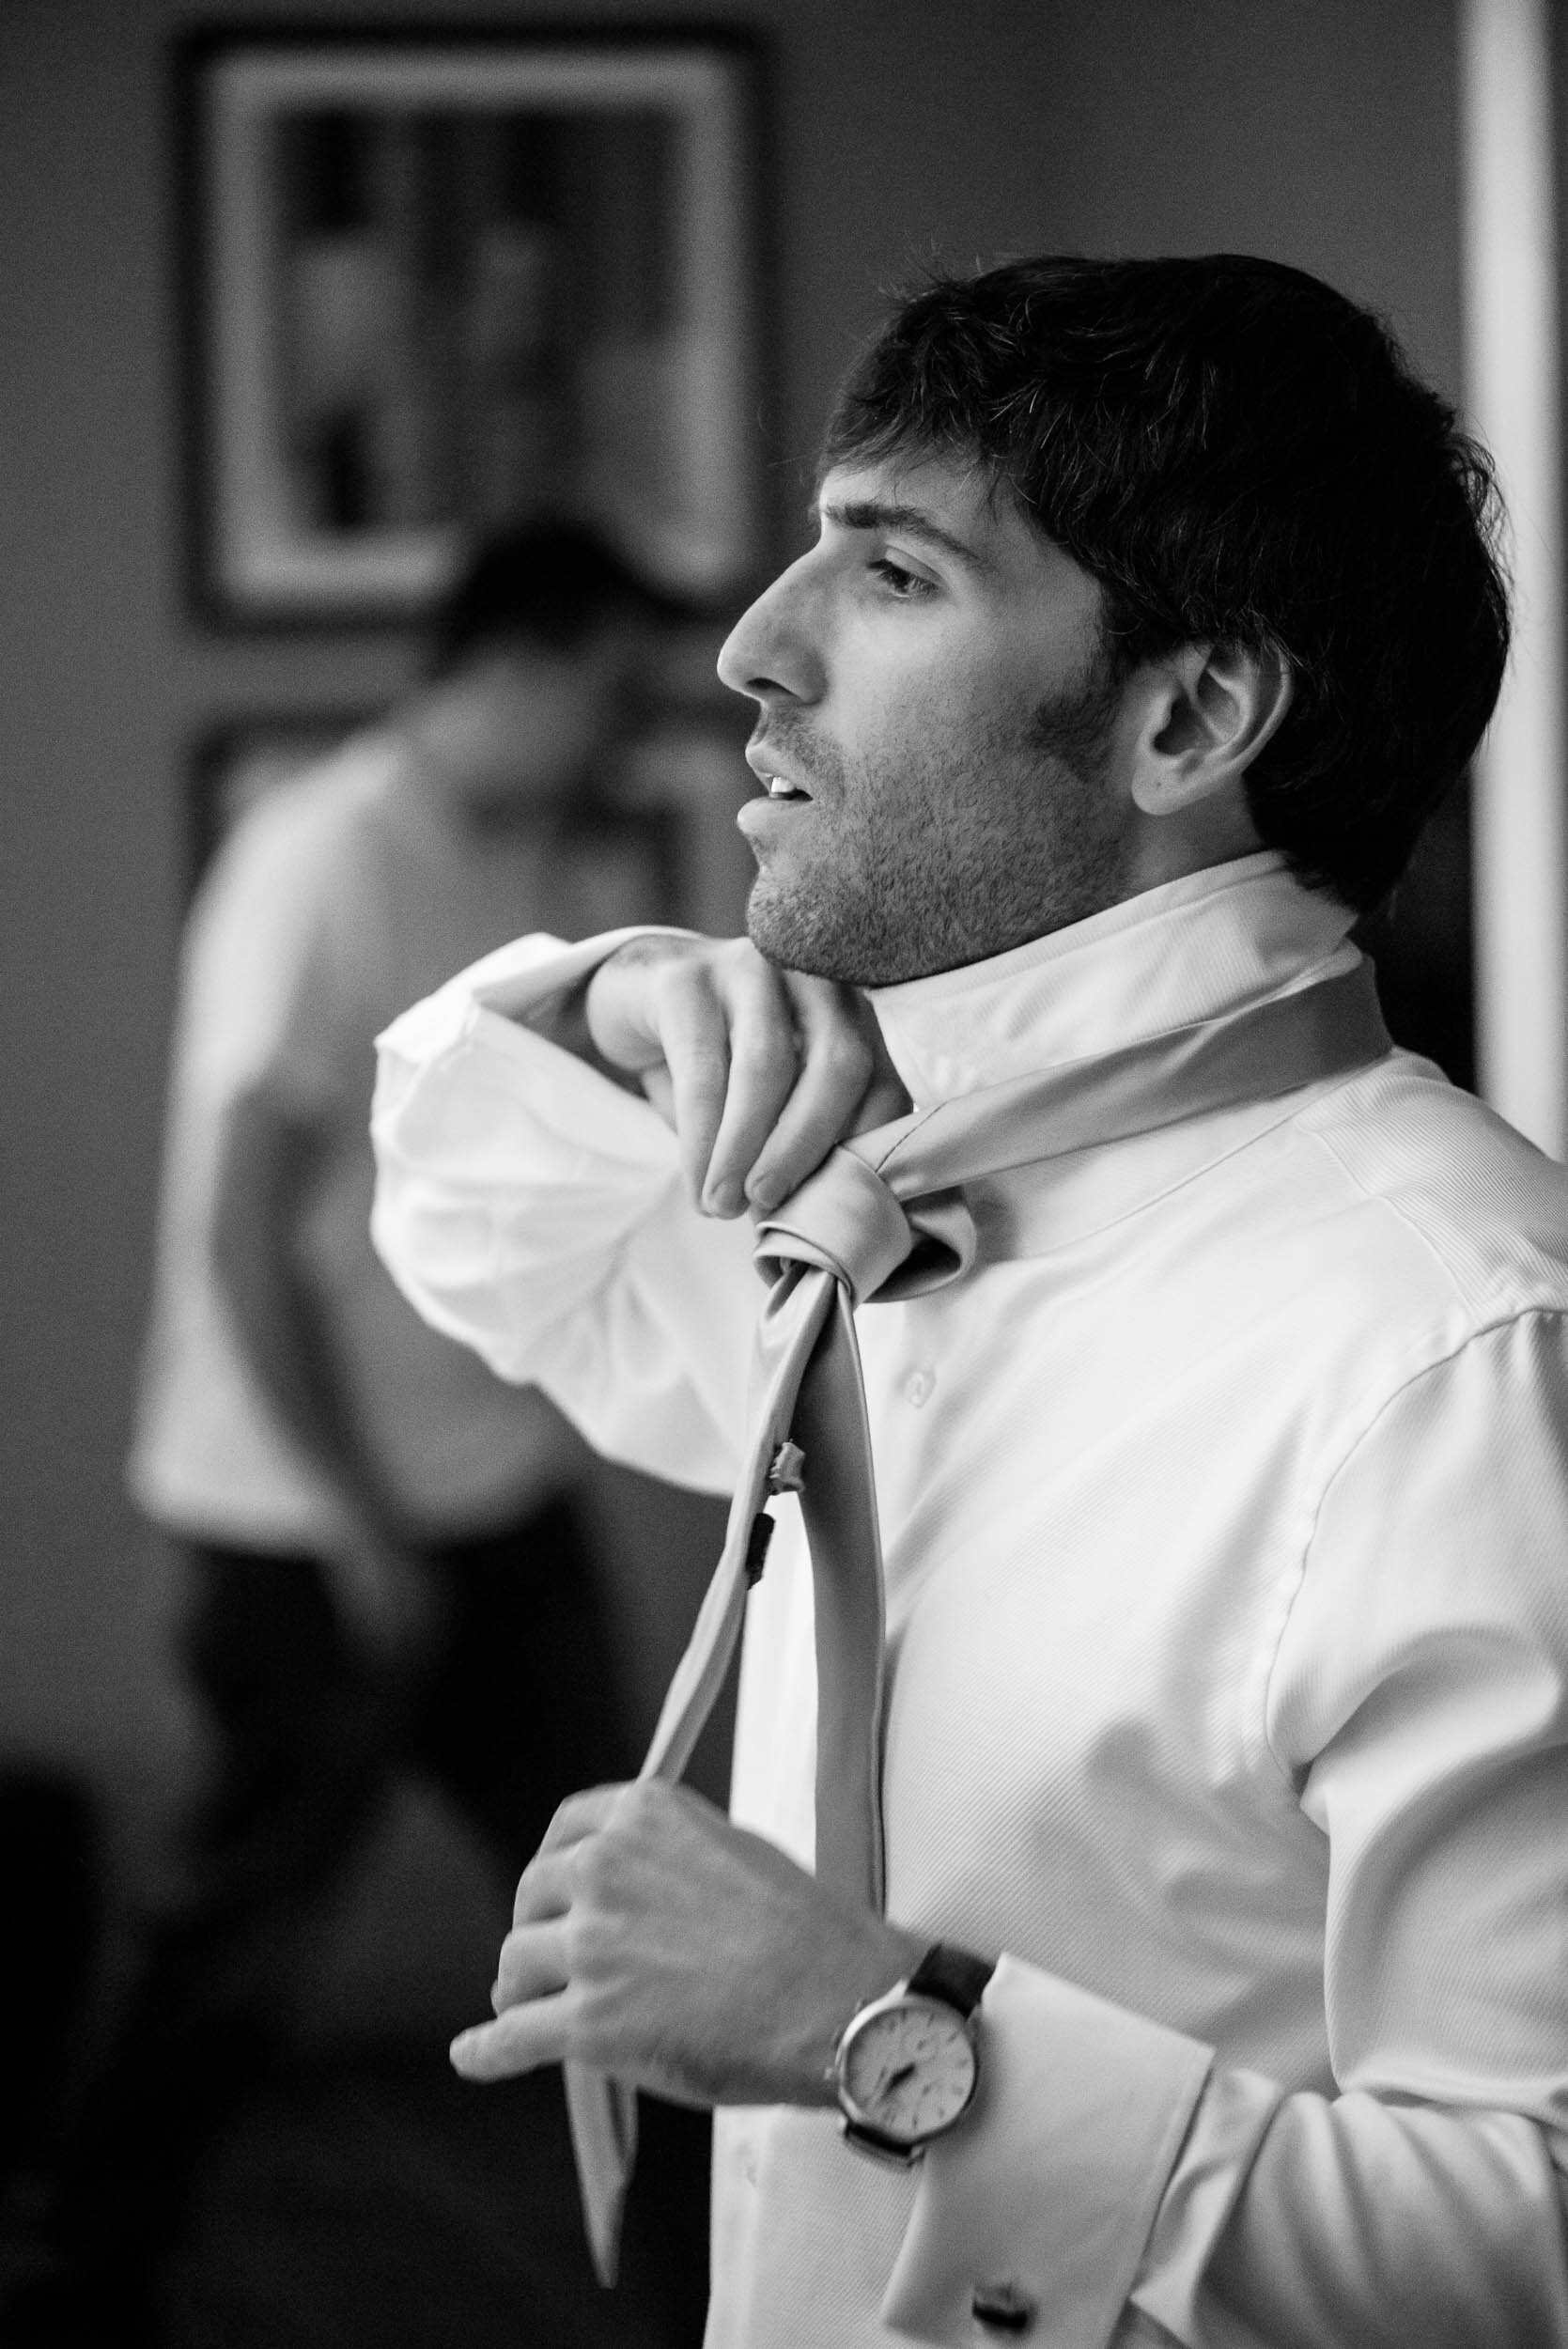 Groom getting ready on the wedding day: Ravenswood Event Center Chicago wedding captured by J. Brown Photography.  